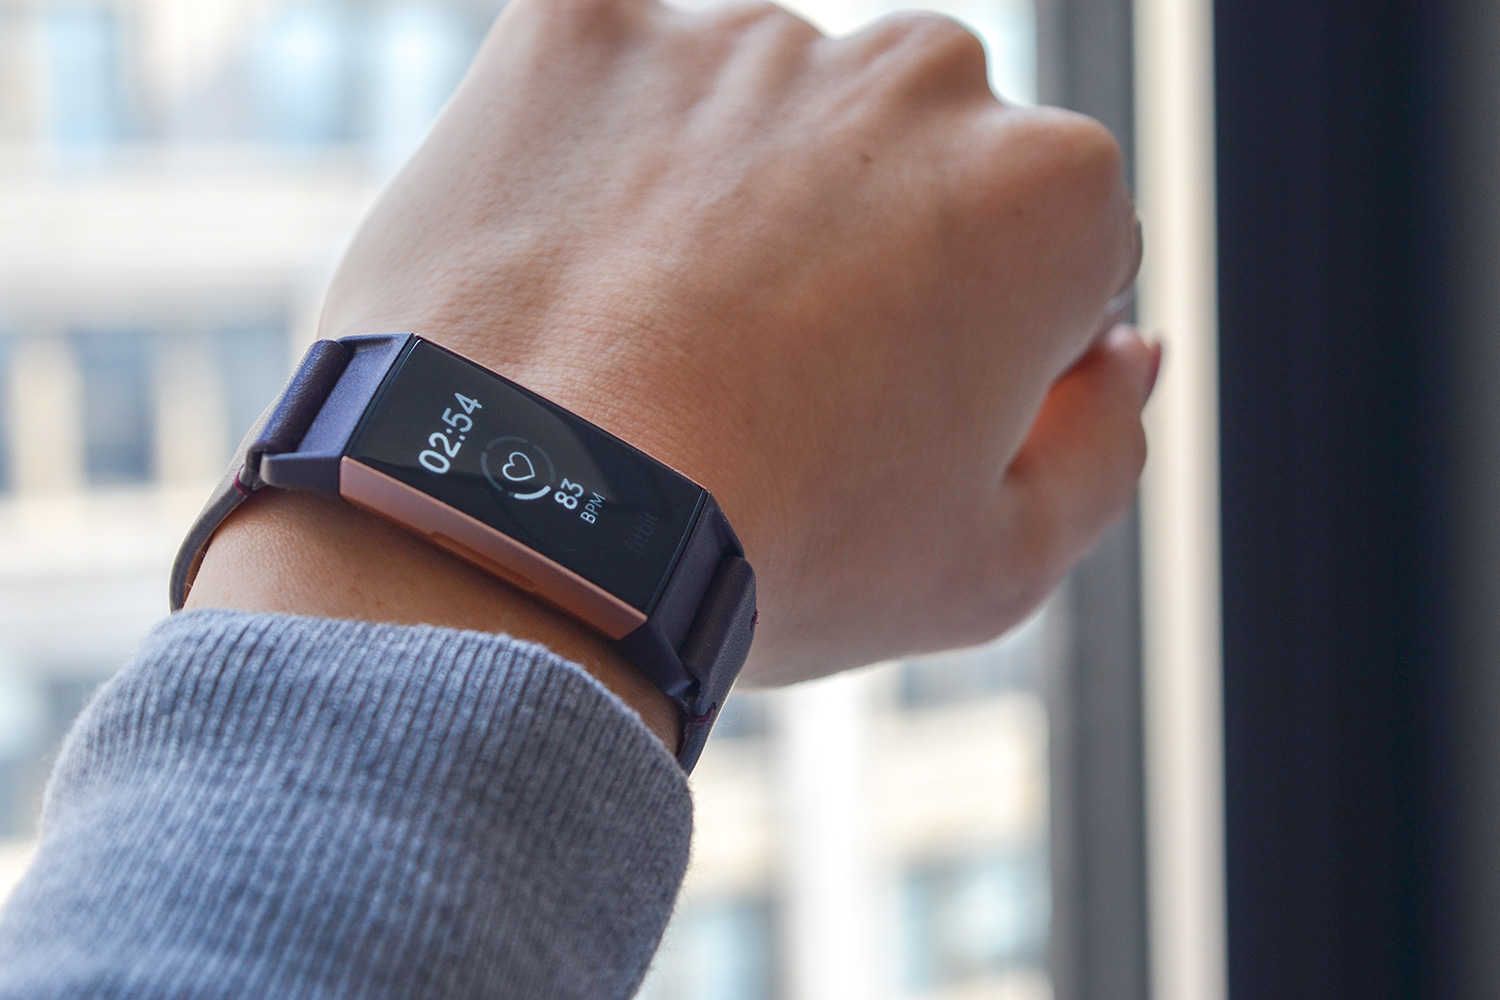 Images of the Upcoming Fitbit Charge 4 Have Online | Digital Trends